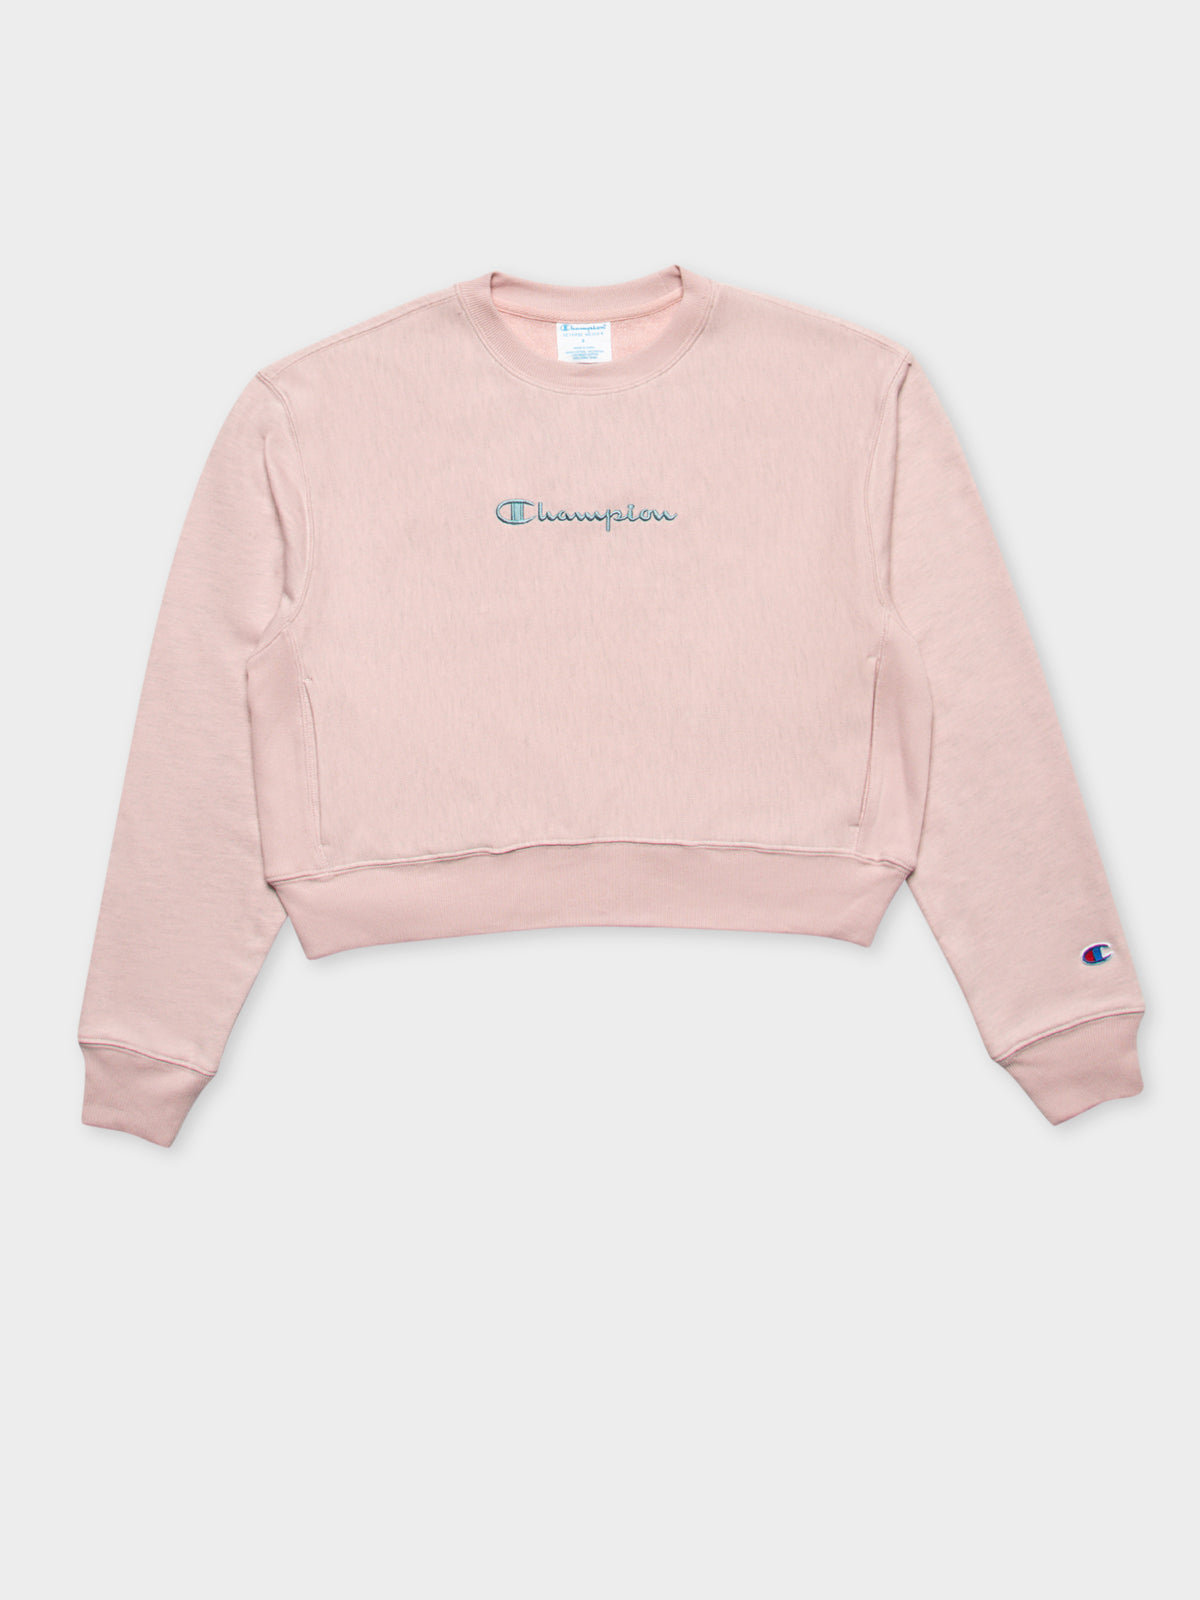 Reverse Weave Overdyed Crew Jumper in Hush Pink